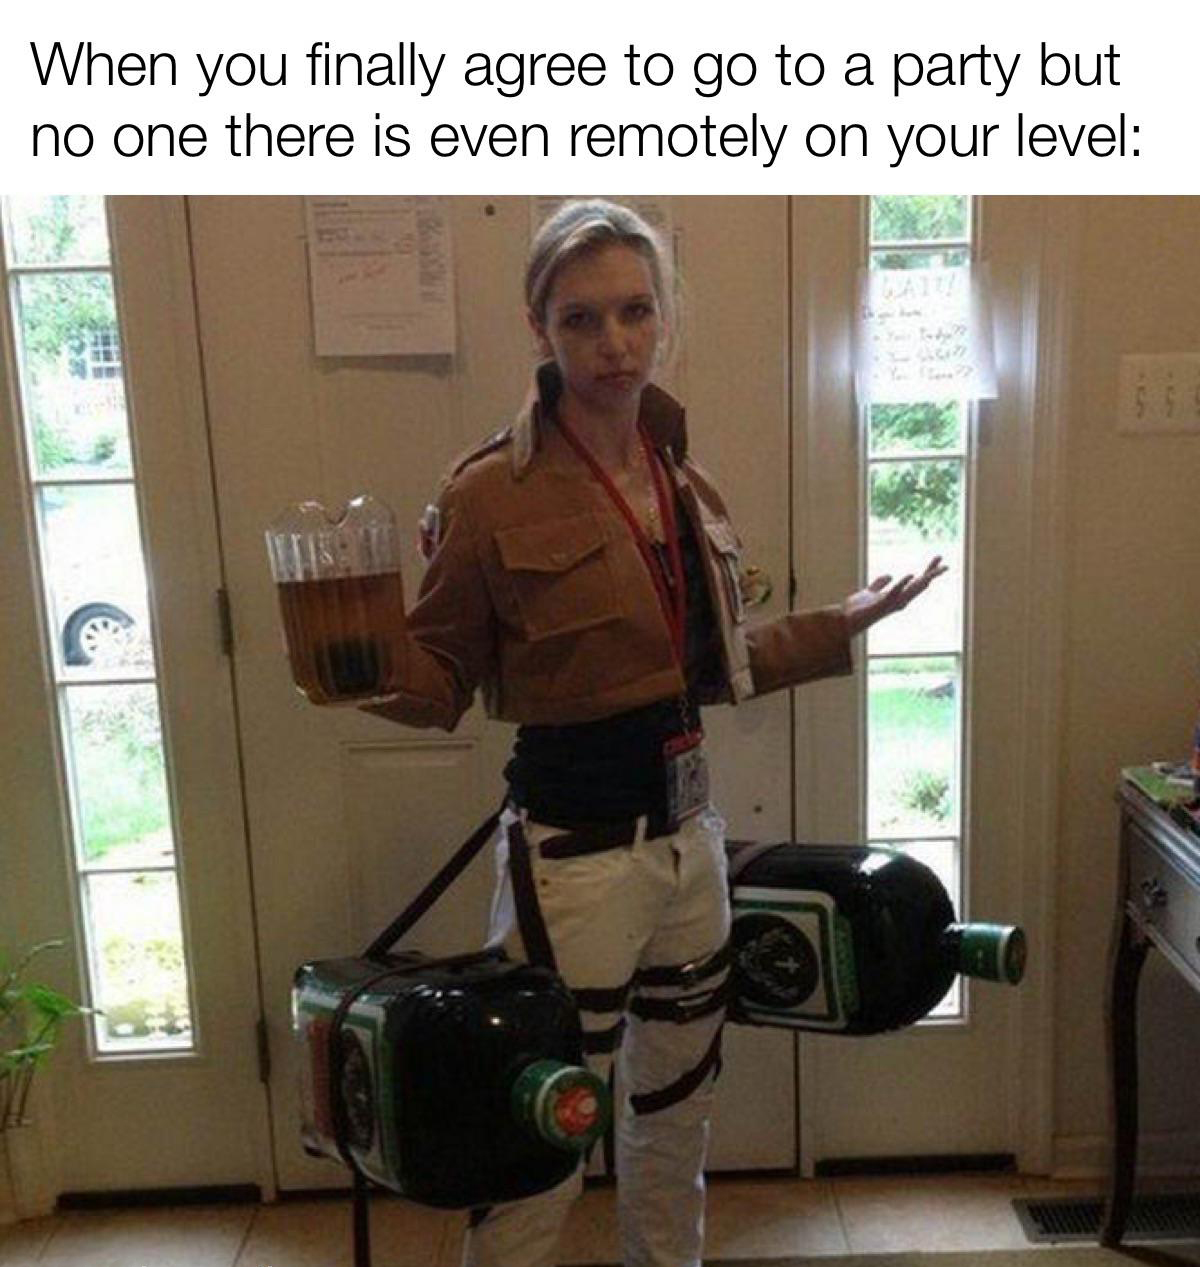 funny memes - dank memes - funny party girl - When you finally agree to go to a party but no one there is even remotely on your level